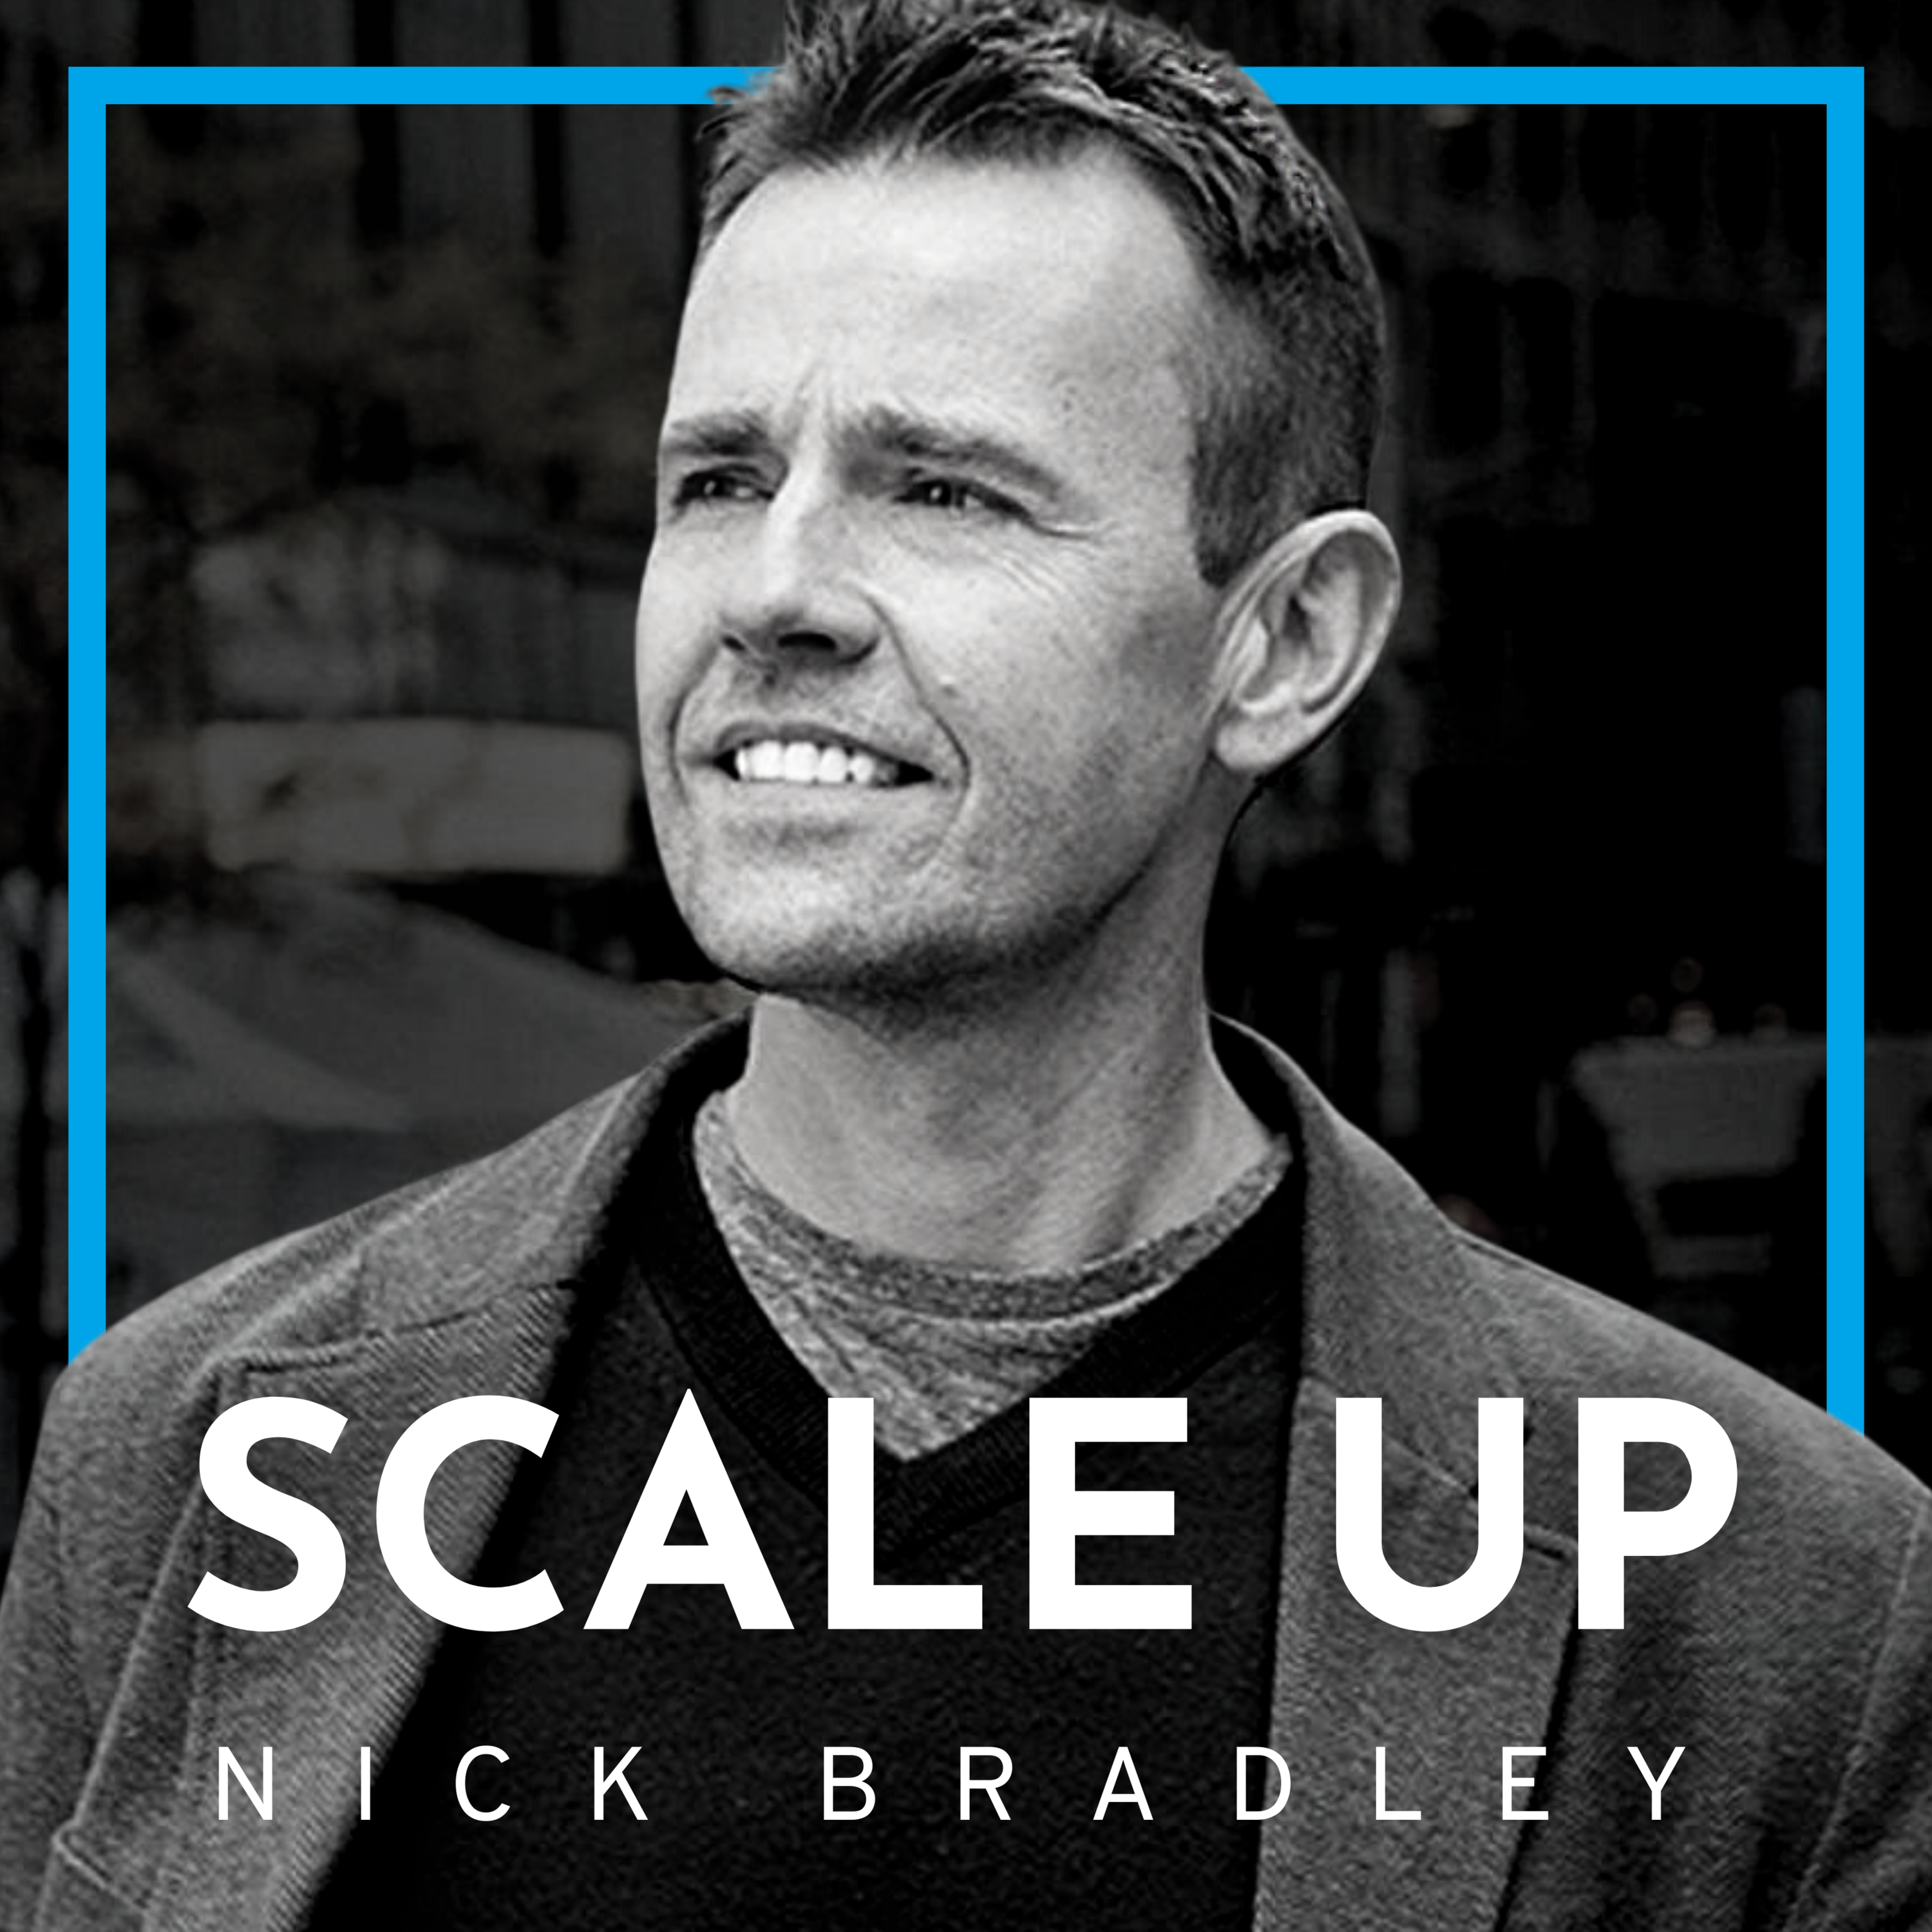 Welcome To Scale Up With Nick Bradley